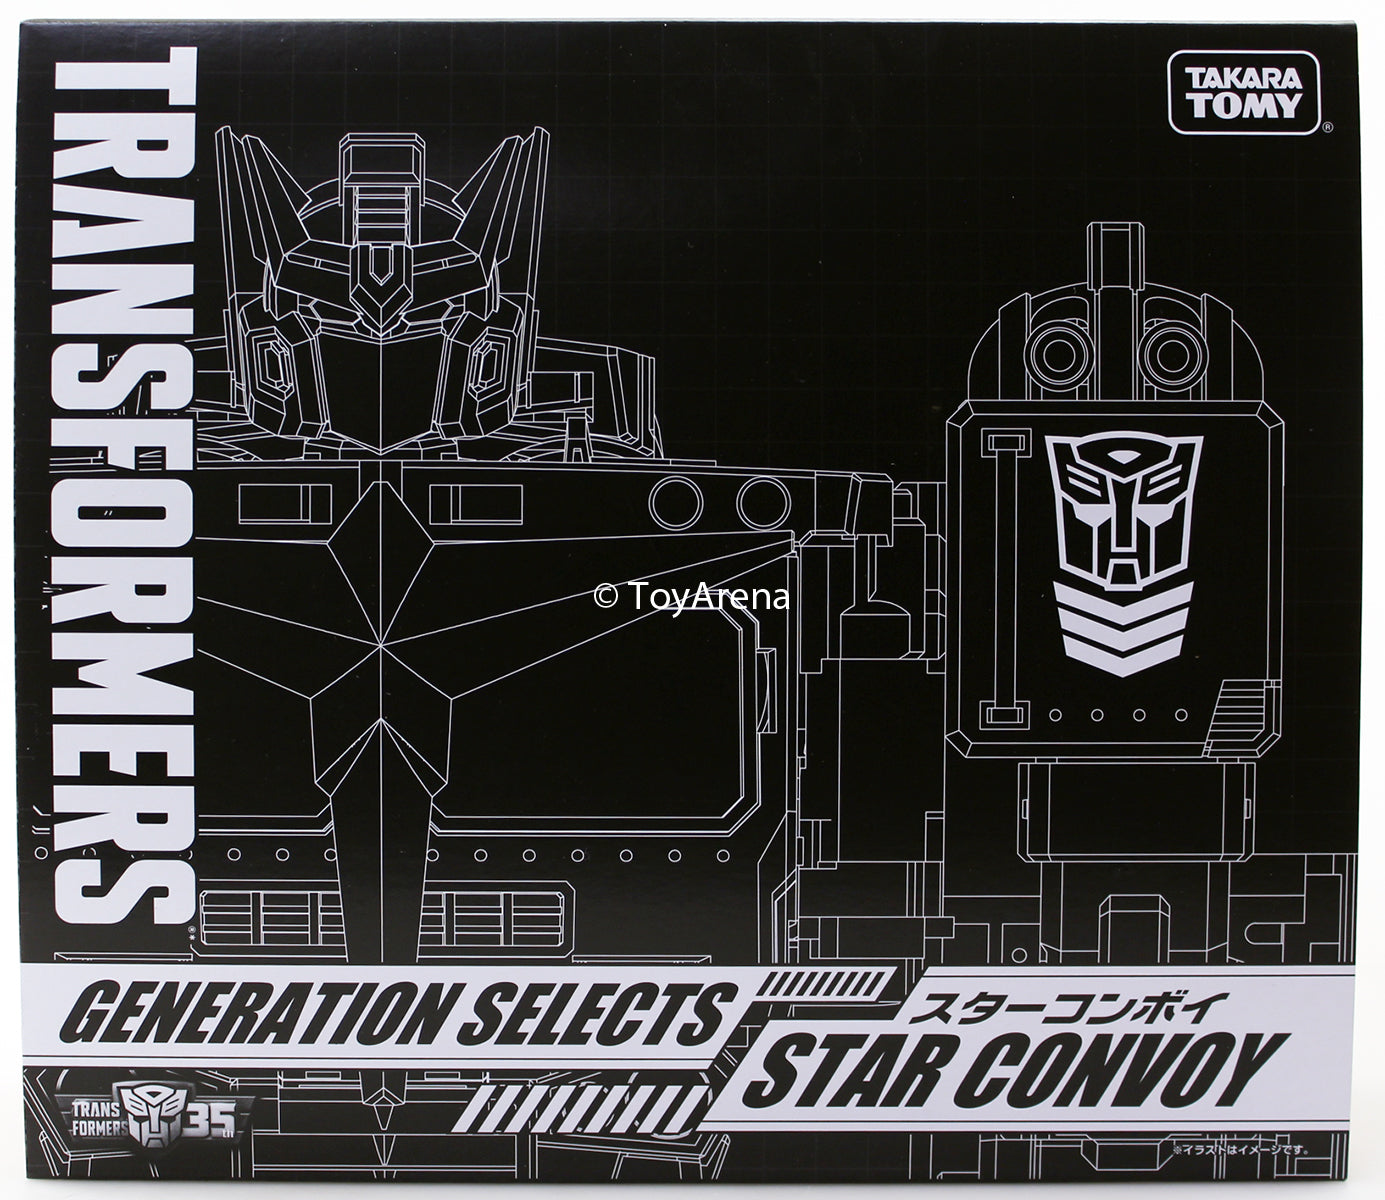 Transformers Generations Selects Star Convoy Optimus Tomy Limited Mall Exclusive Action Figure